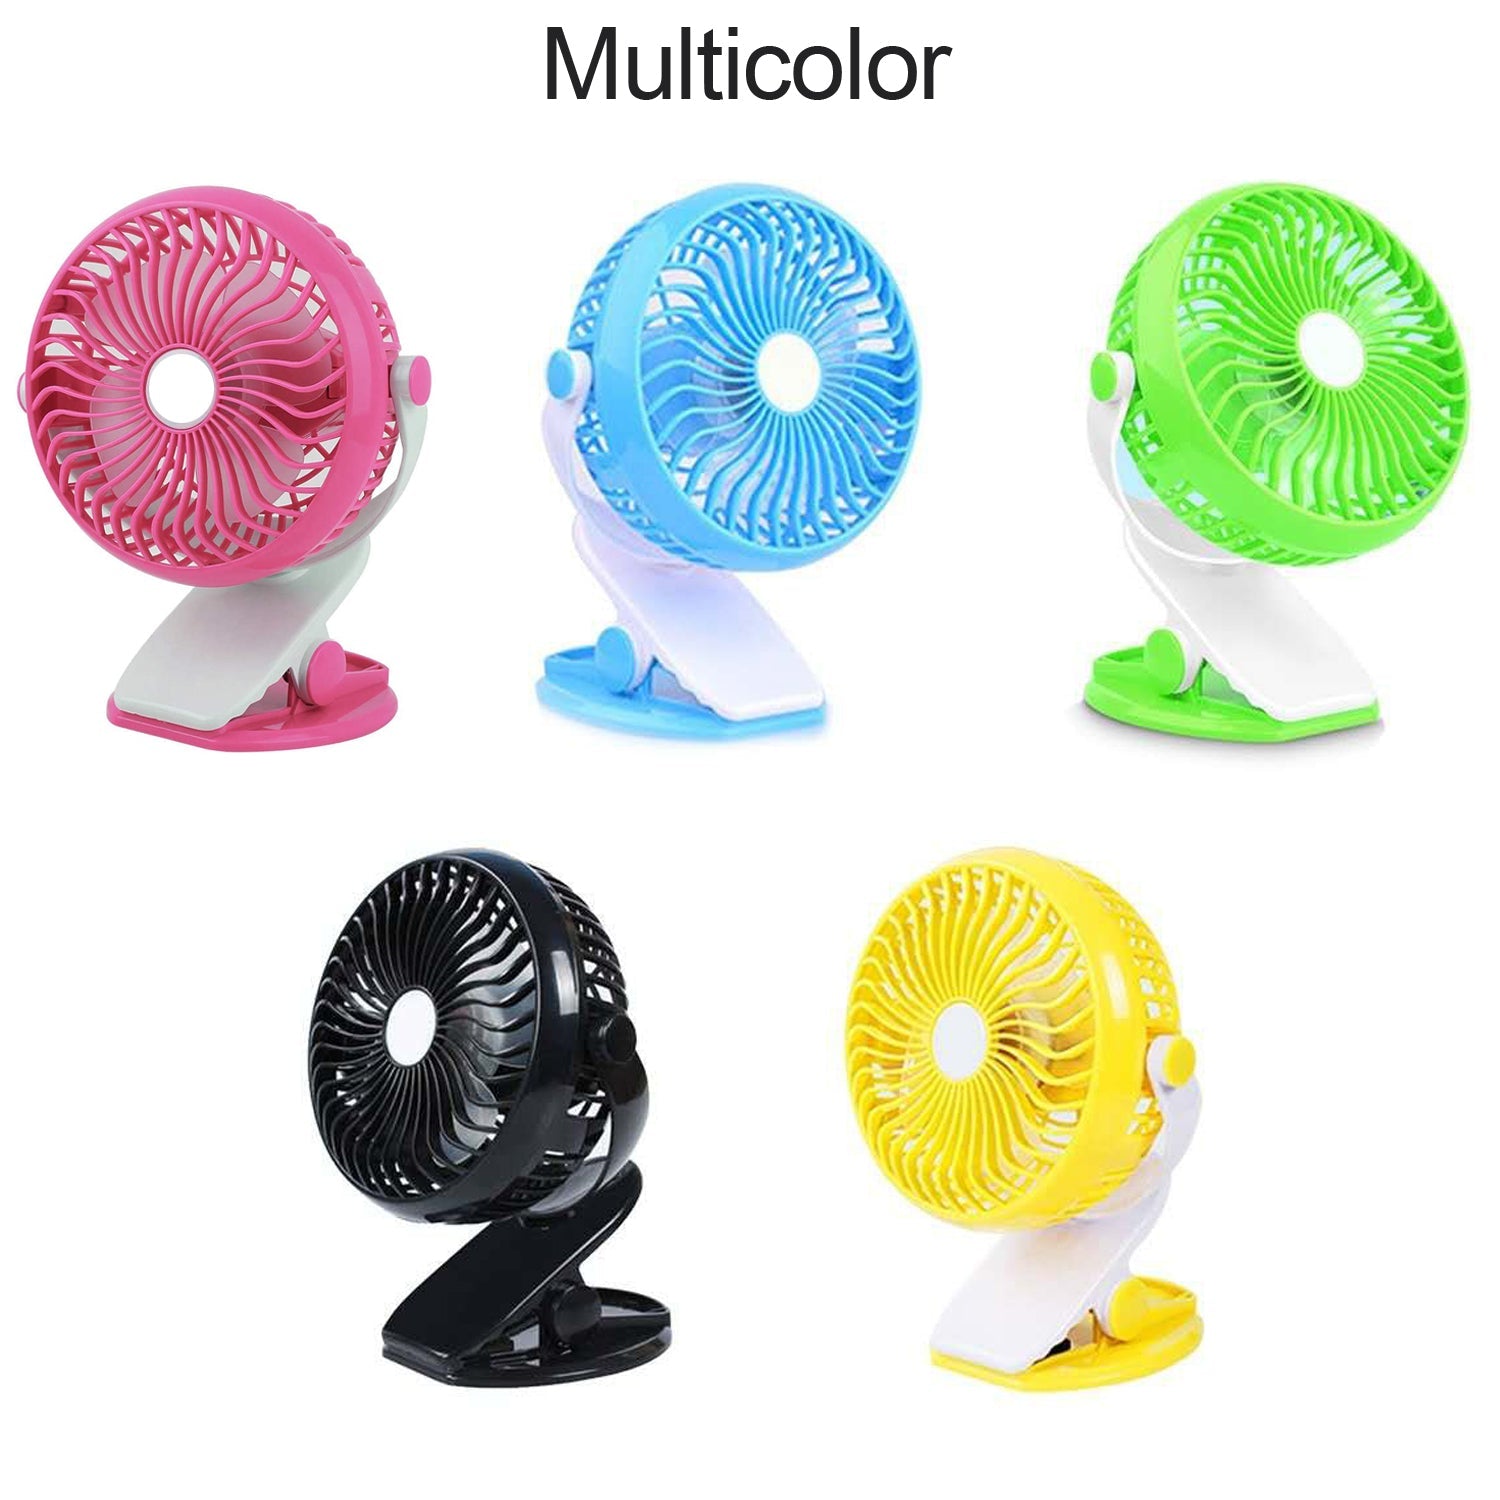 4824 Mini USB Clip Fan widely used in summers for cool down rooms and body purposes.